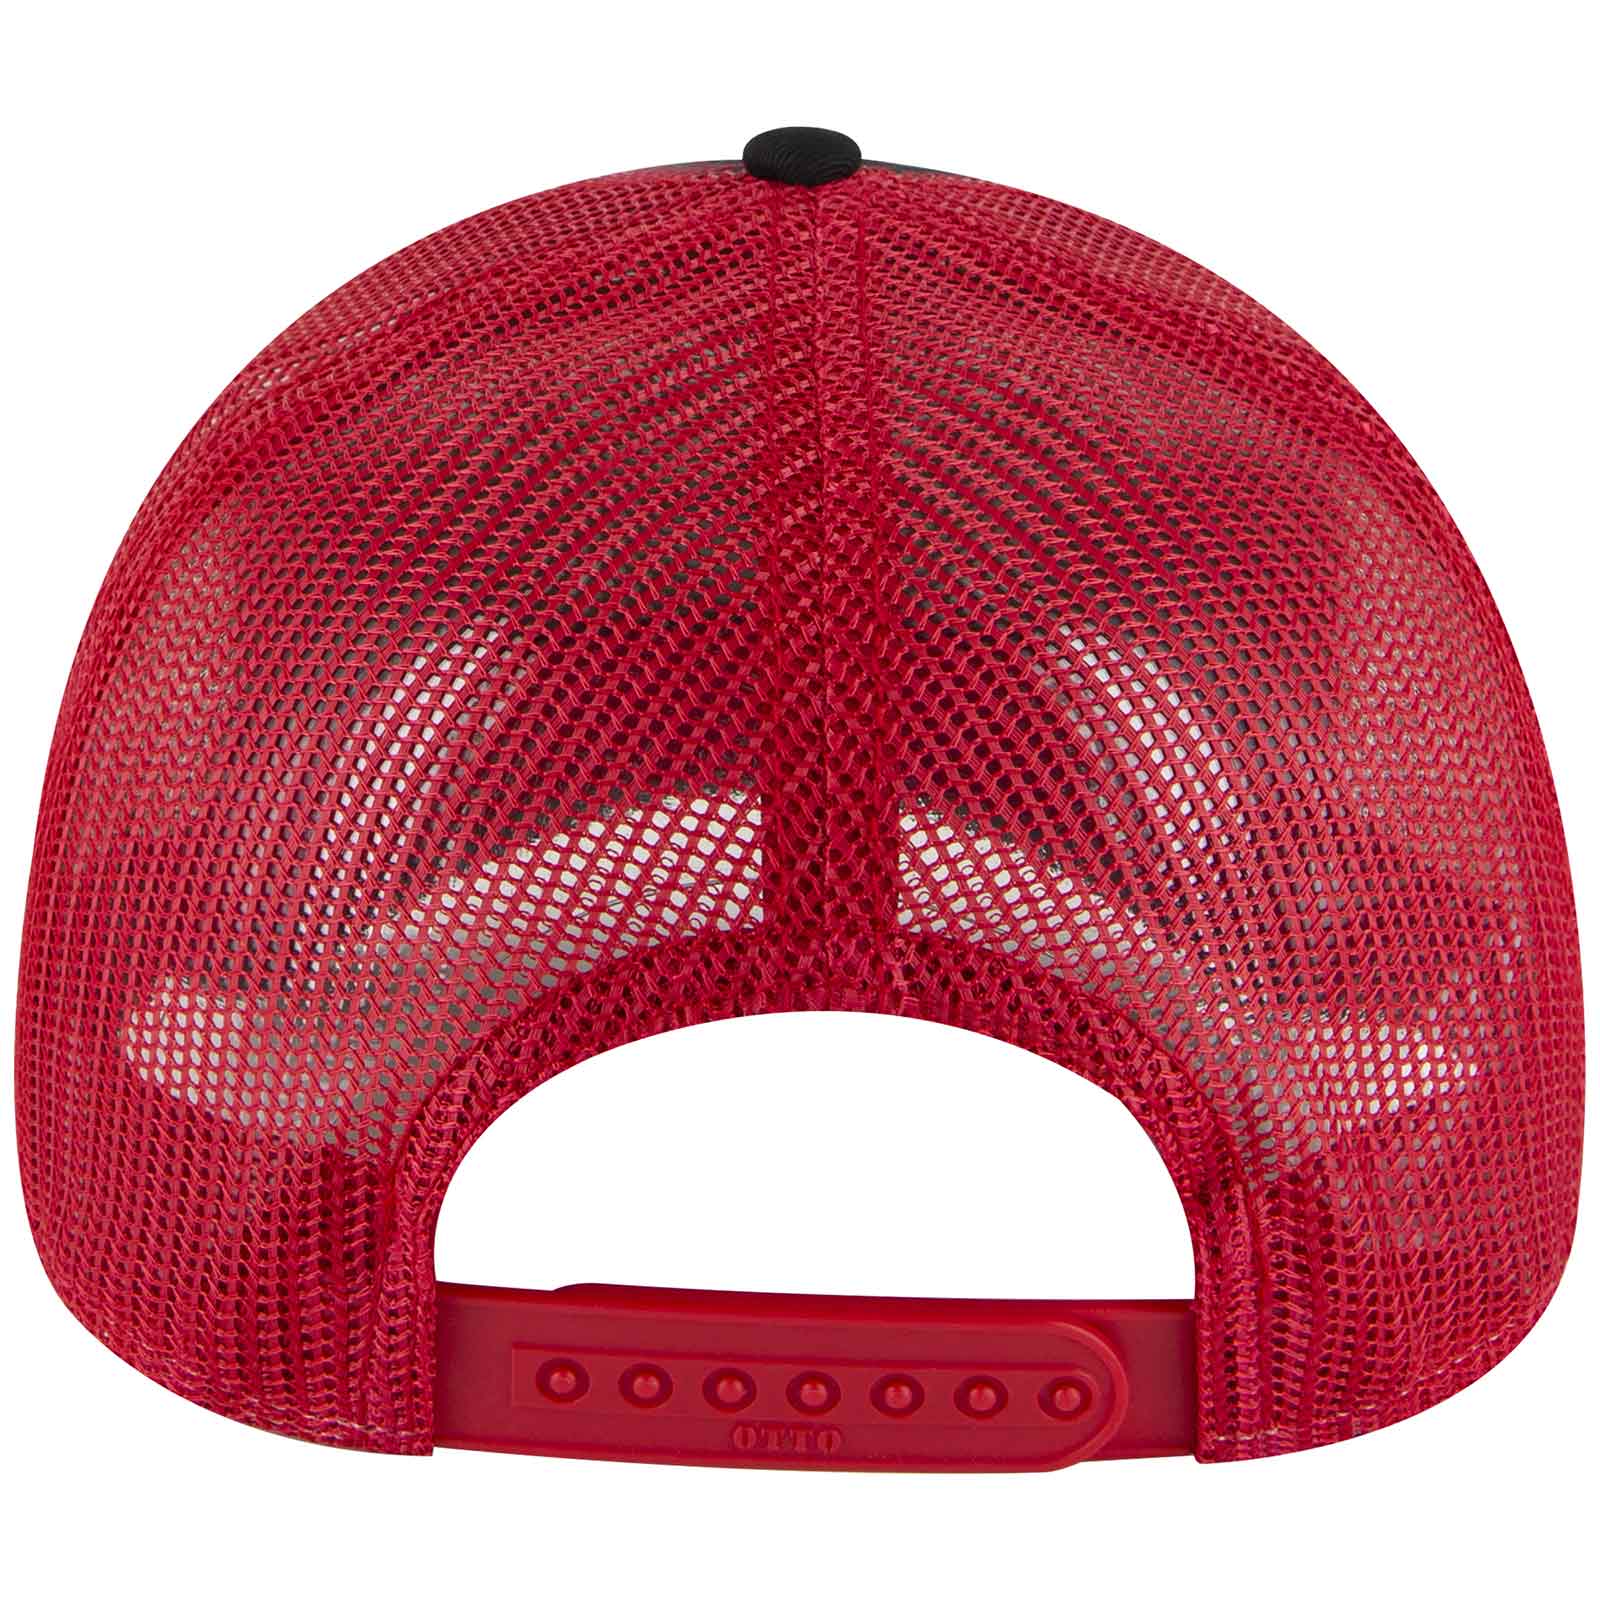 OTTO 102-1318 5 Panel Low Profile Mesh Back Trucker Cap - Black Black Red - HIT a Double - 1